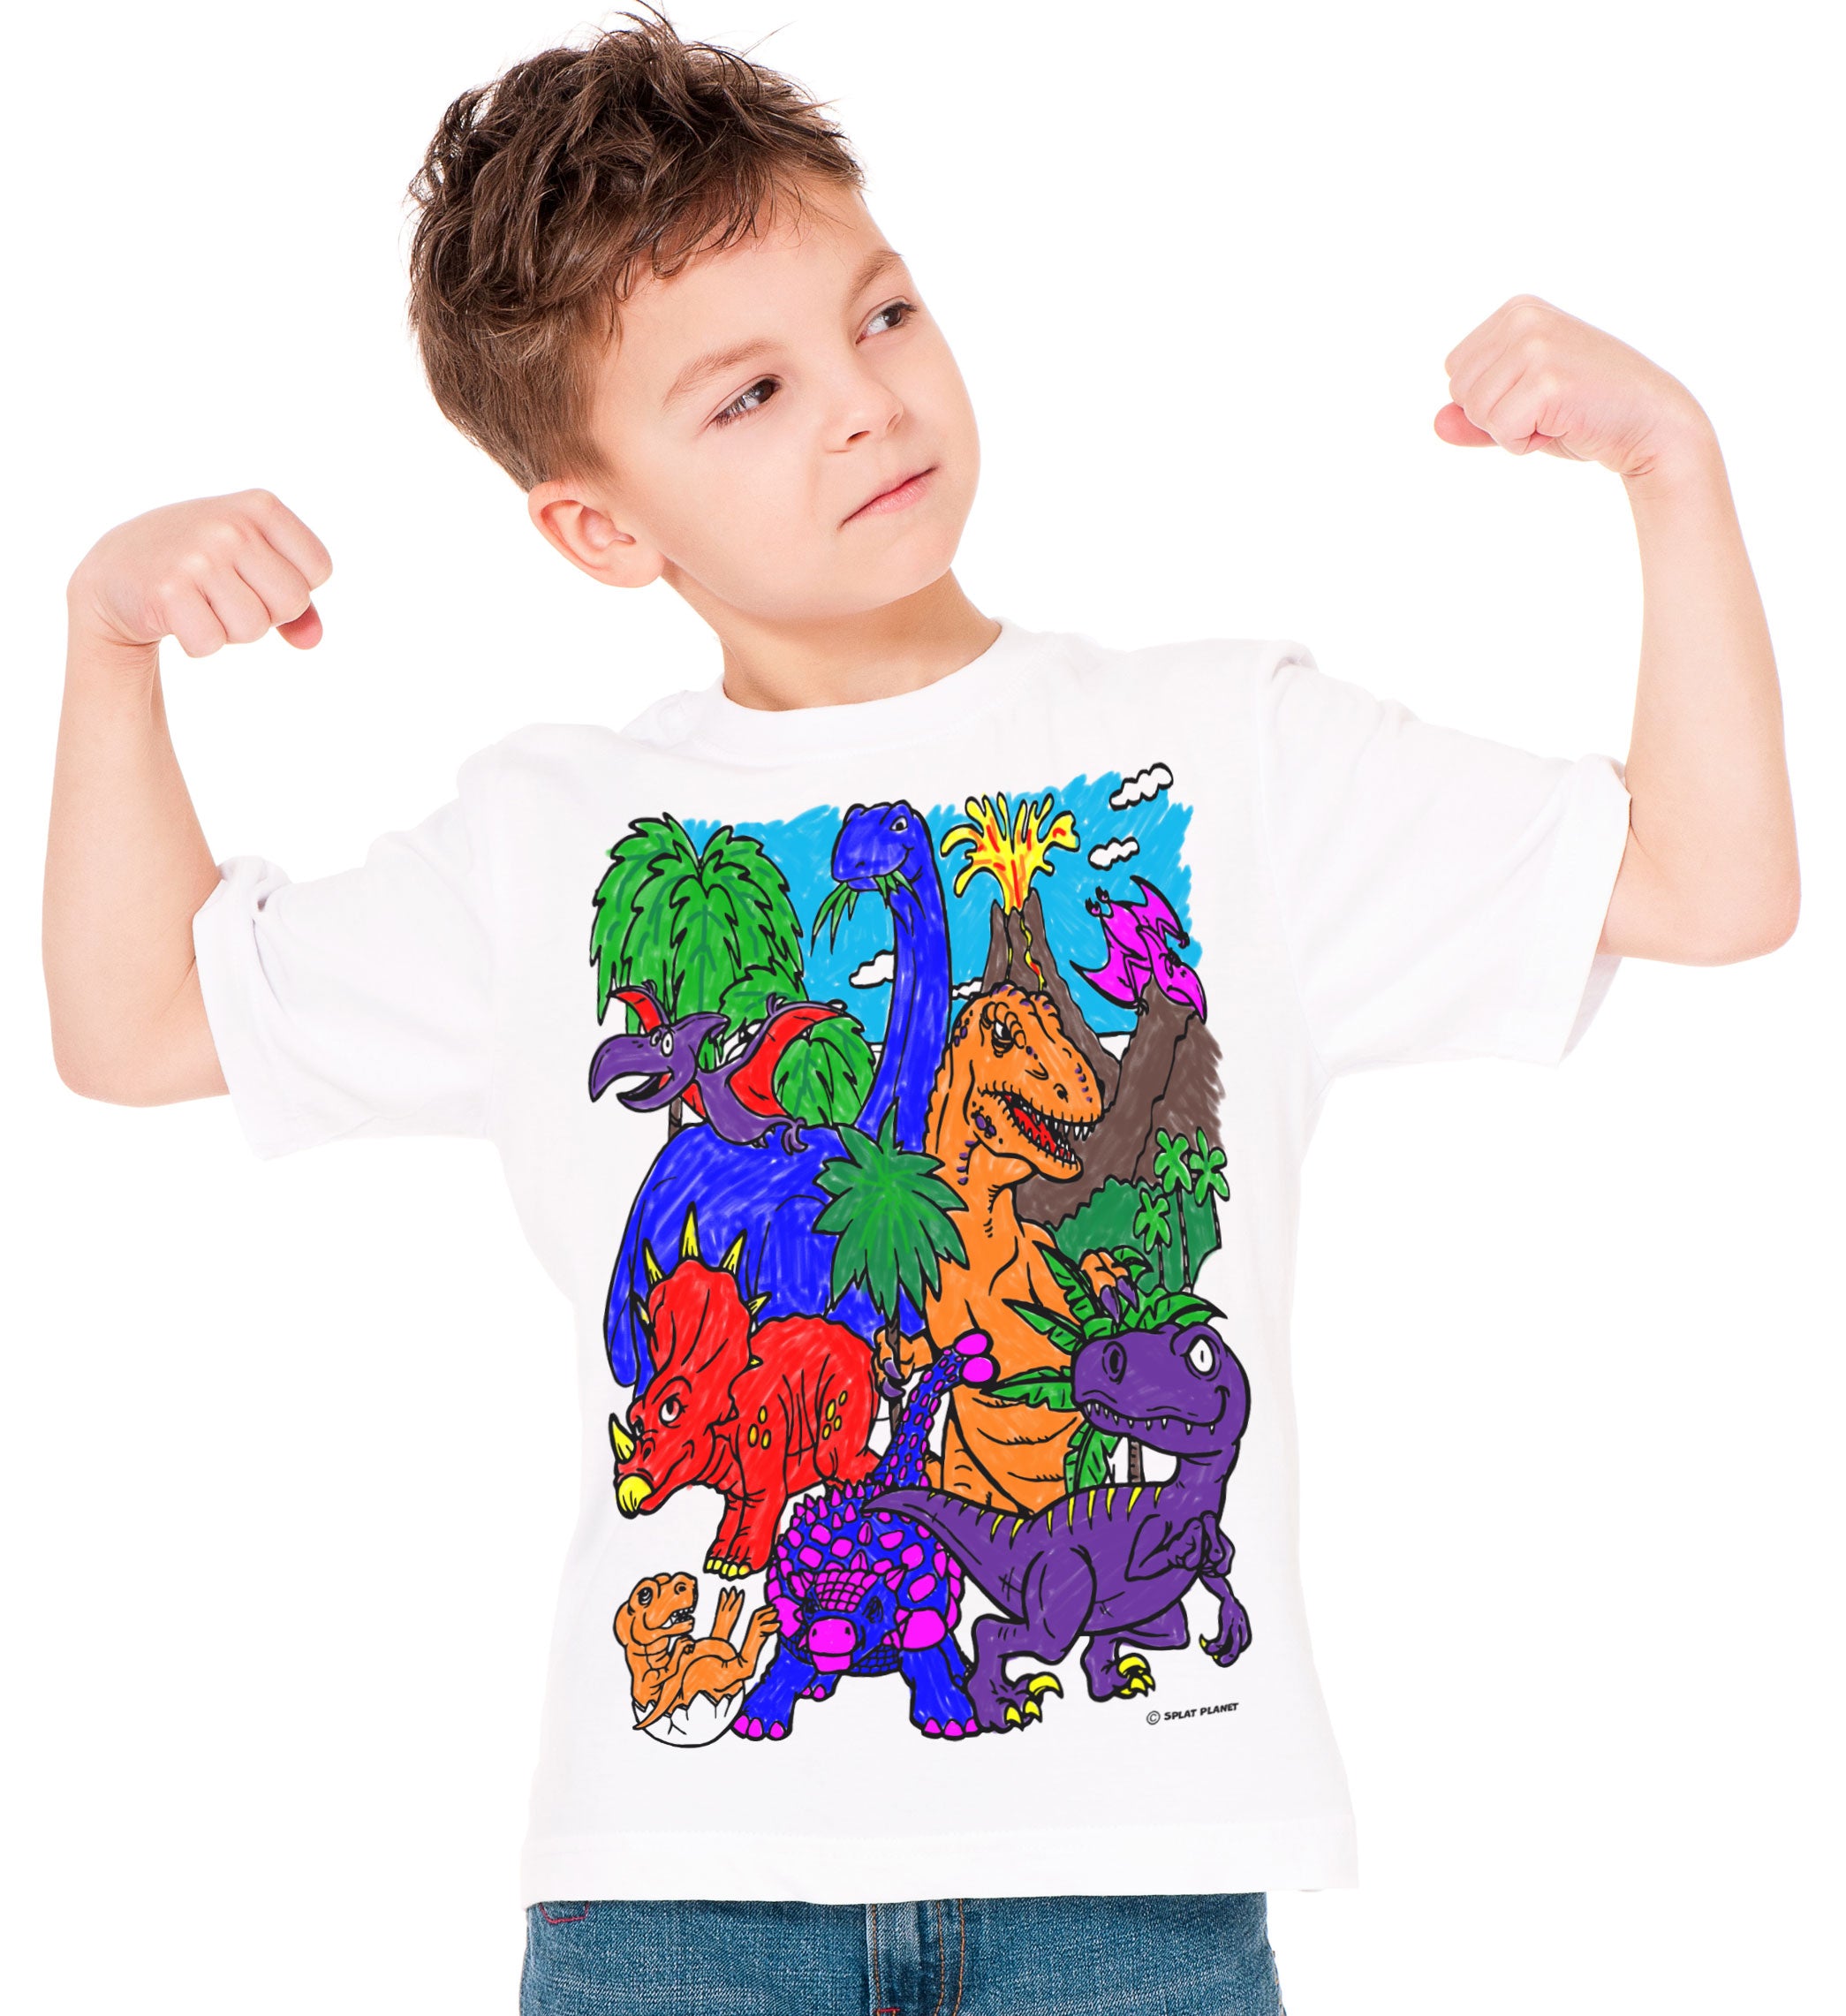 kids, children, chlidrens, eatsleepdoodle, eat sleep doodle, grafix, colour in t-shirt, colour in tshirt, color in t-shirt, color in t shirt, Dinosaurs, Dino, Dinosaur, Dinosaur colouring, Trex, Tyrannosaurus, Triceratops, Velociraptor, Stegosaurus, colour in, wash out, colour in again, magic colouring, fabric pens, splat planet, colouring, colour in, washable pens, magic, toddlers, Kids, magic,  colouring, fabric pens, boys, girls, gift, christmas present, unique easter present,